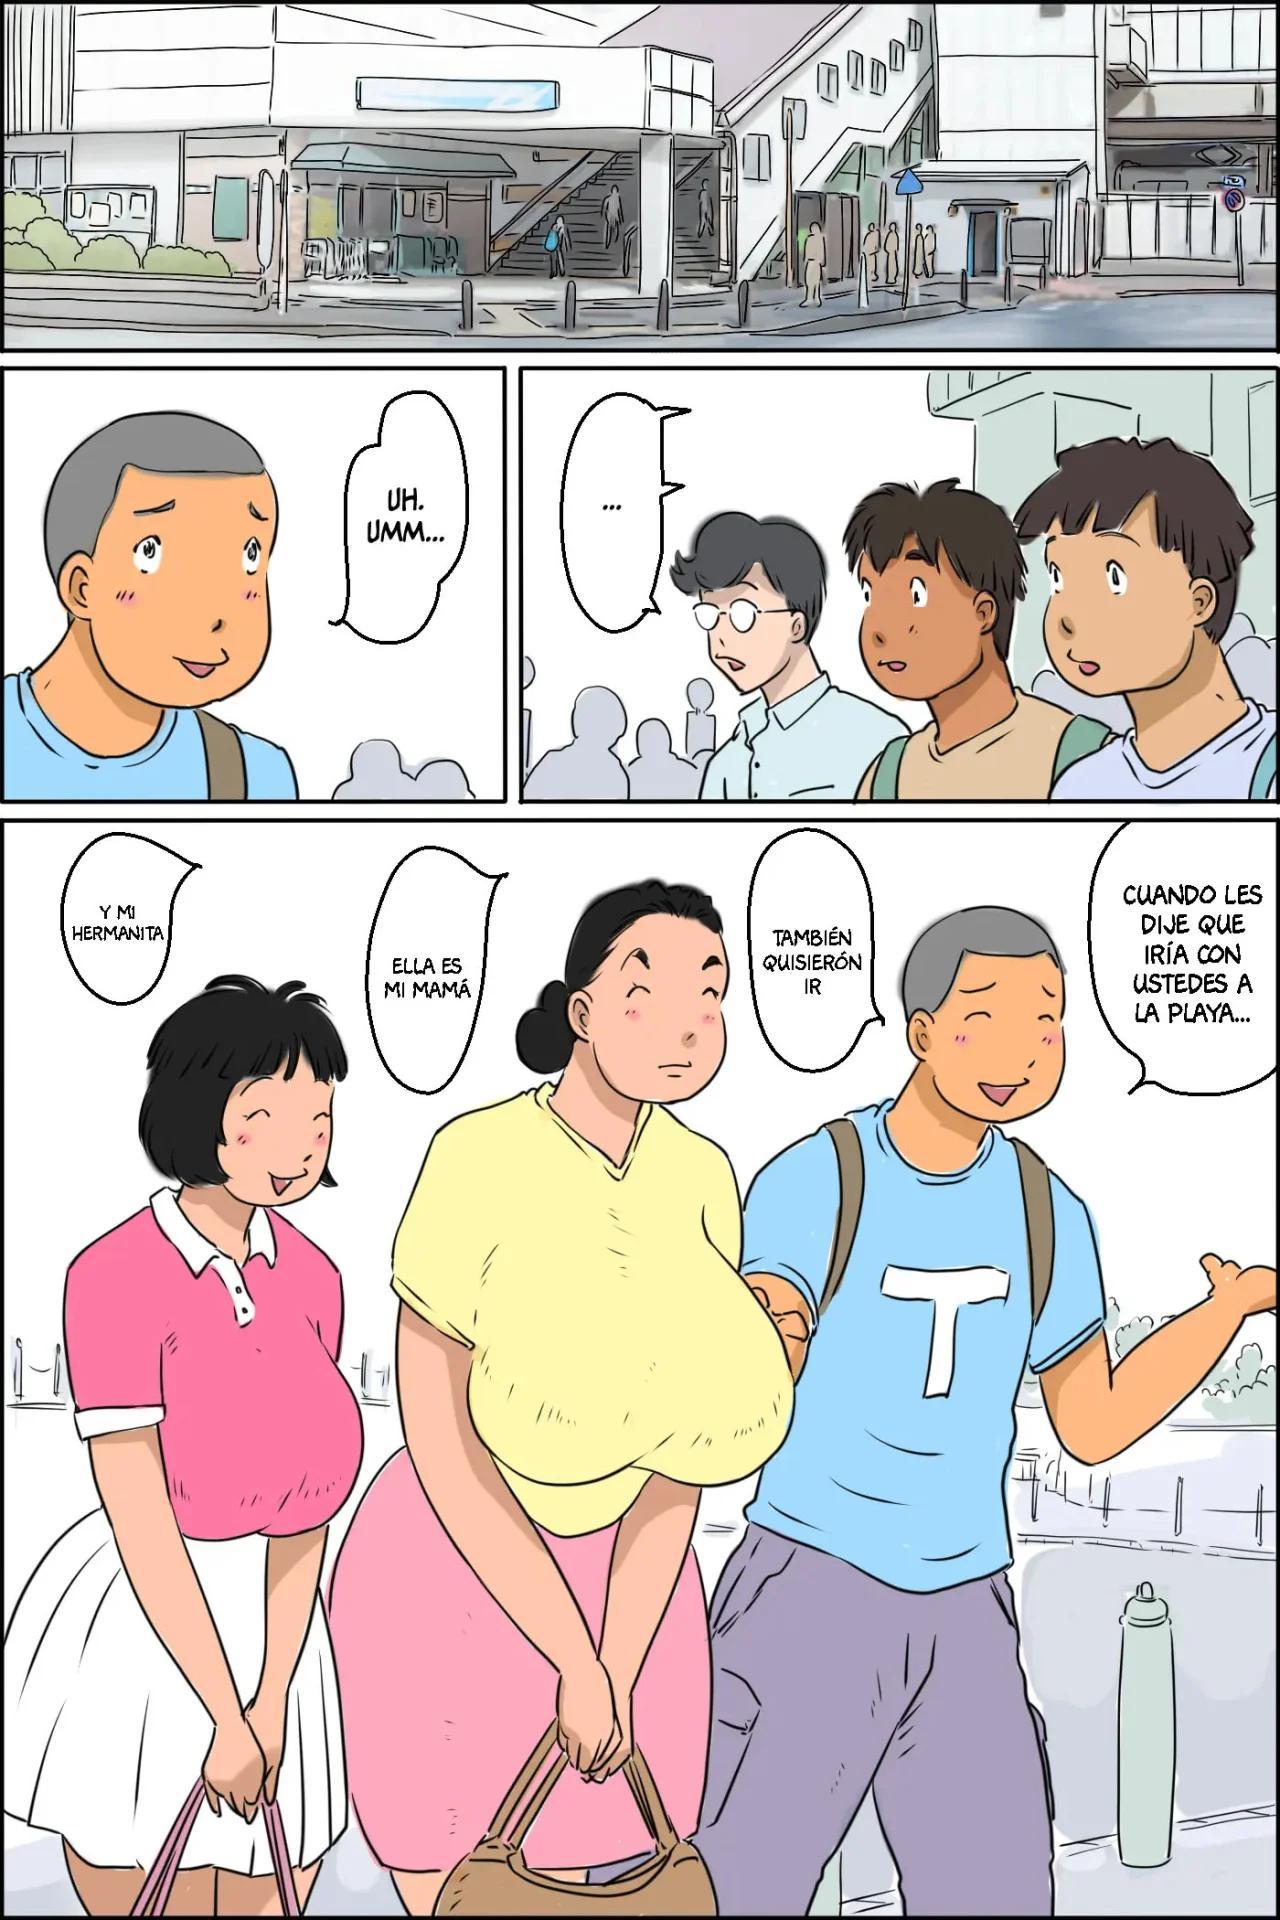 The Maruyama Family Goes To The Beach - 1